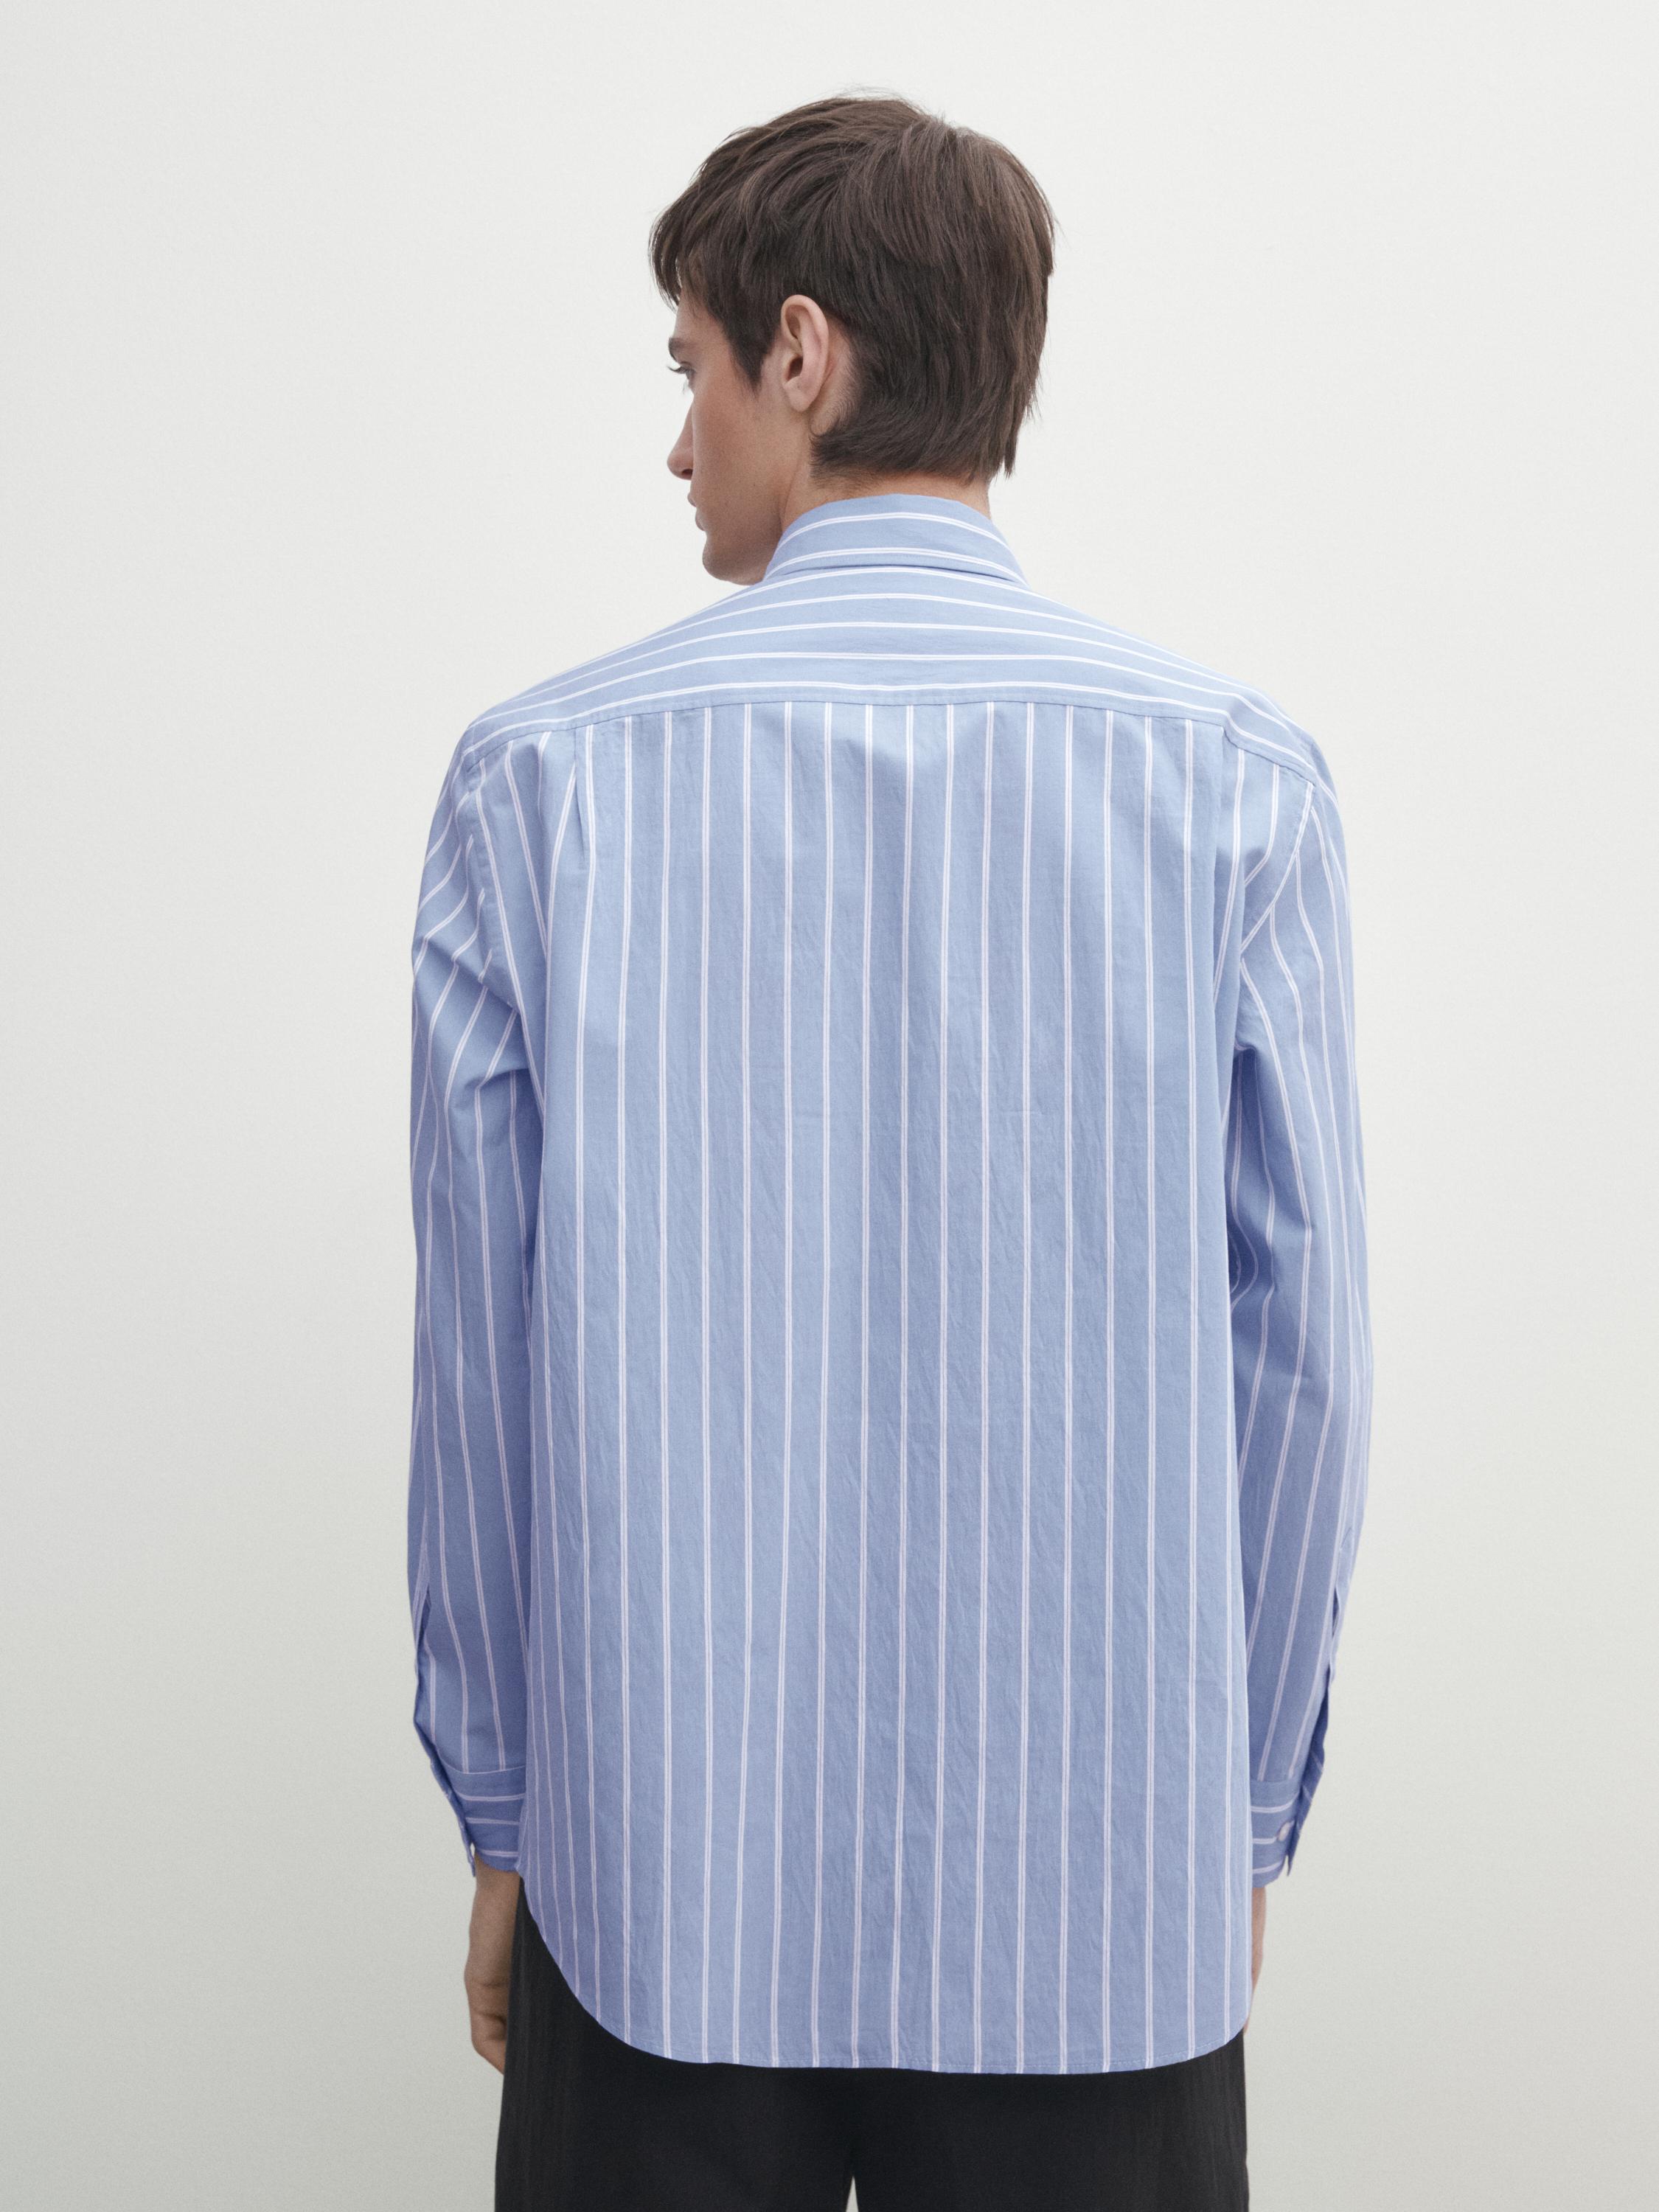 Relaxed fit double-stripe shirt